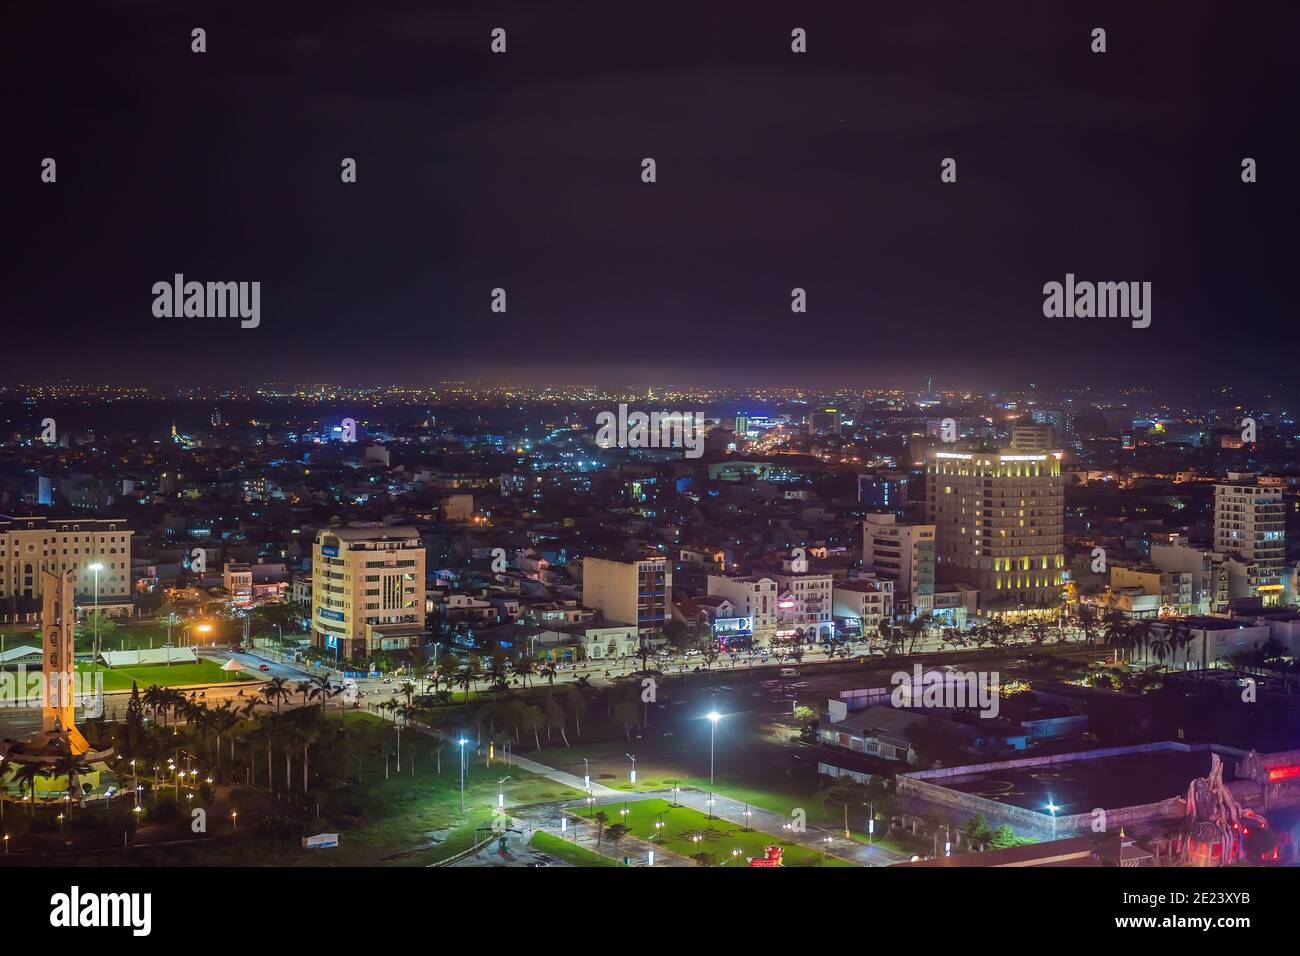 The architecture shimmering under the night-lit city makes the city more vibrant in Da Nang, Vietnam Stock Photo